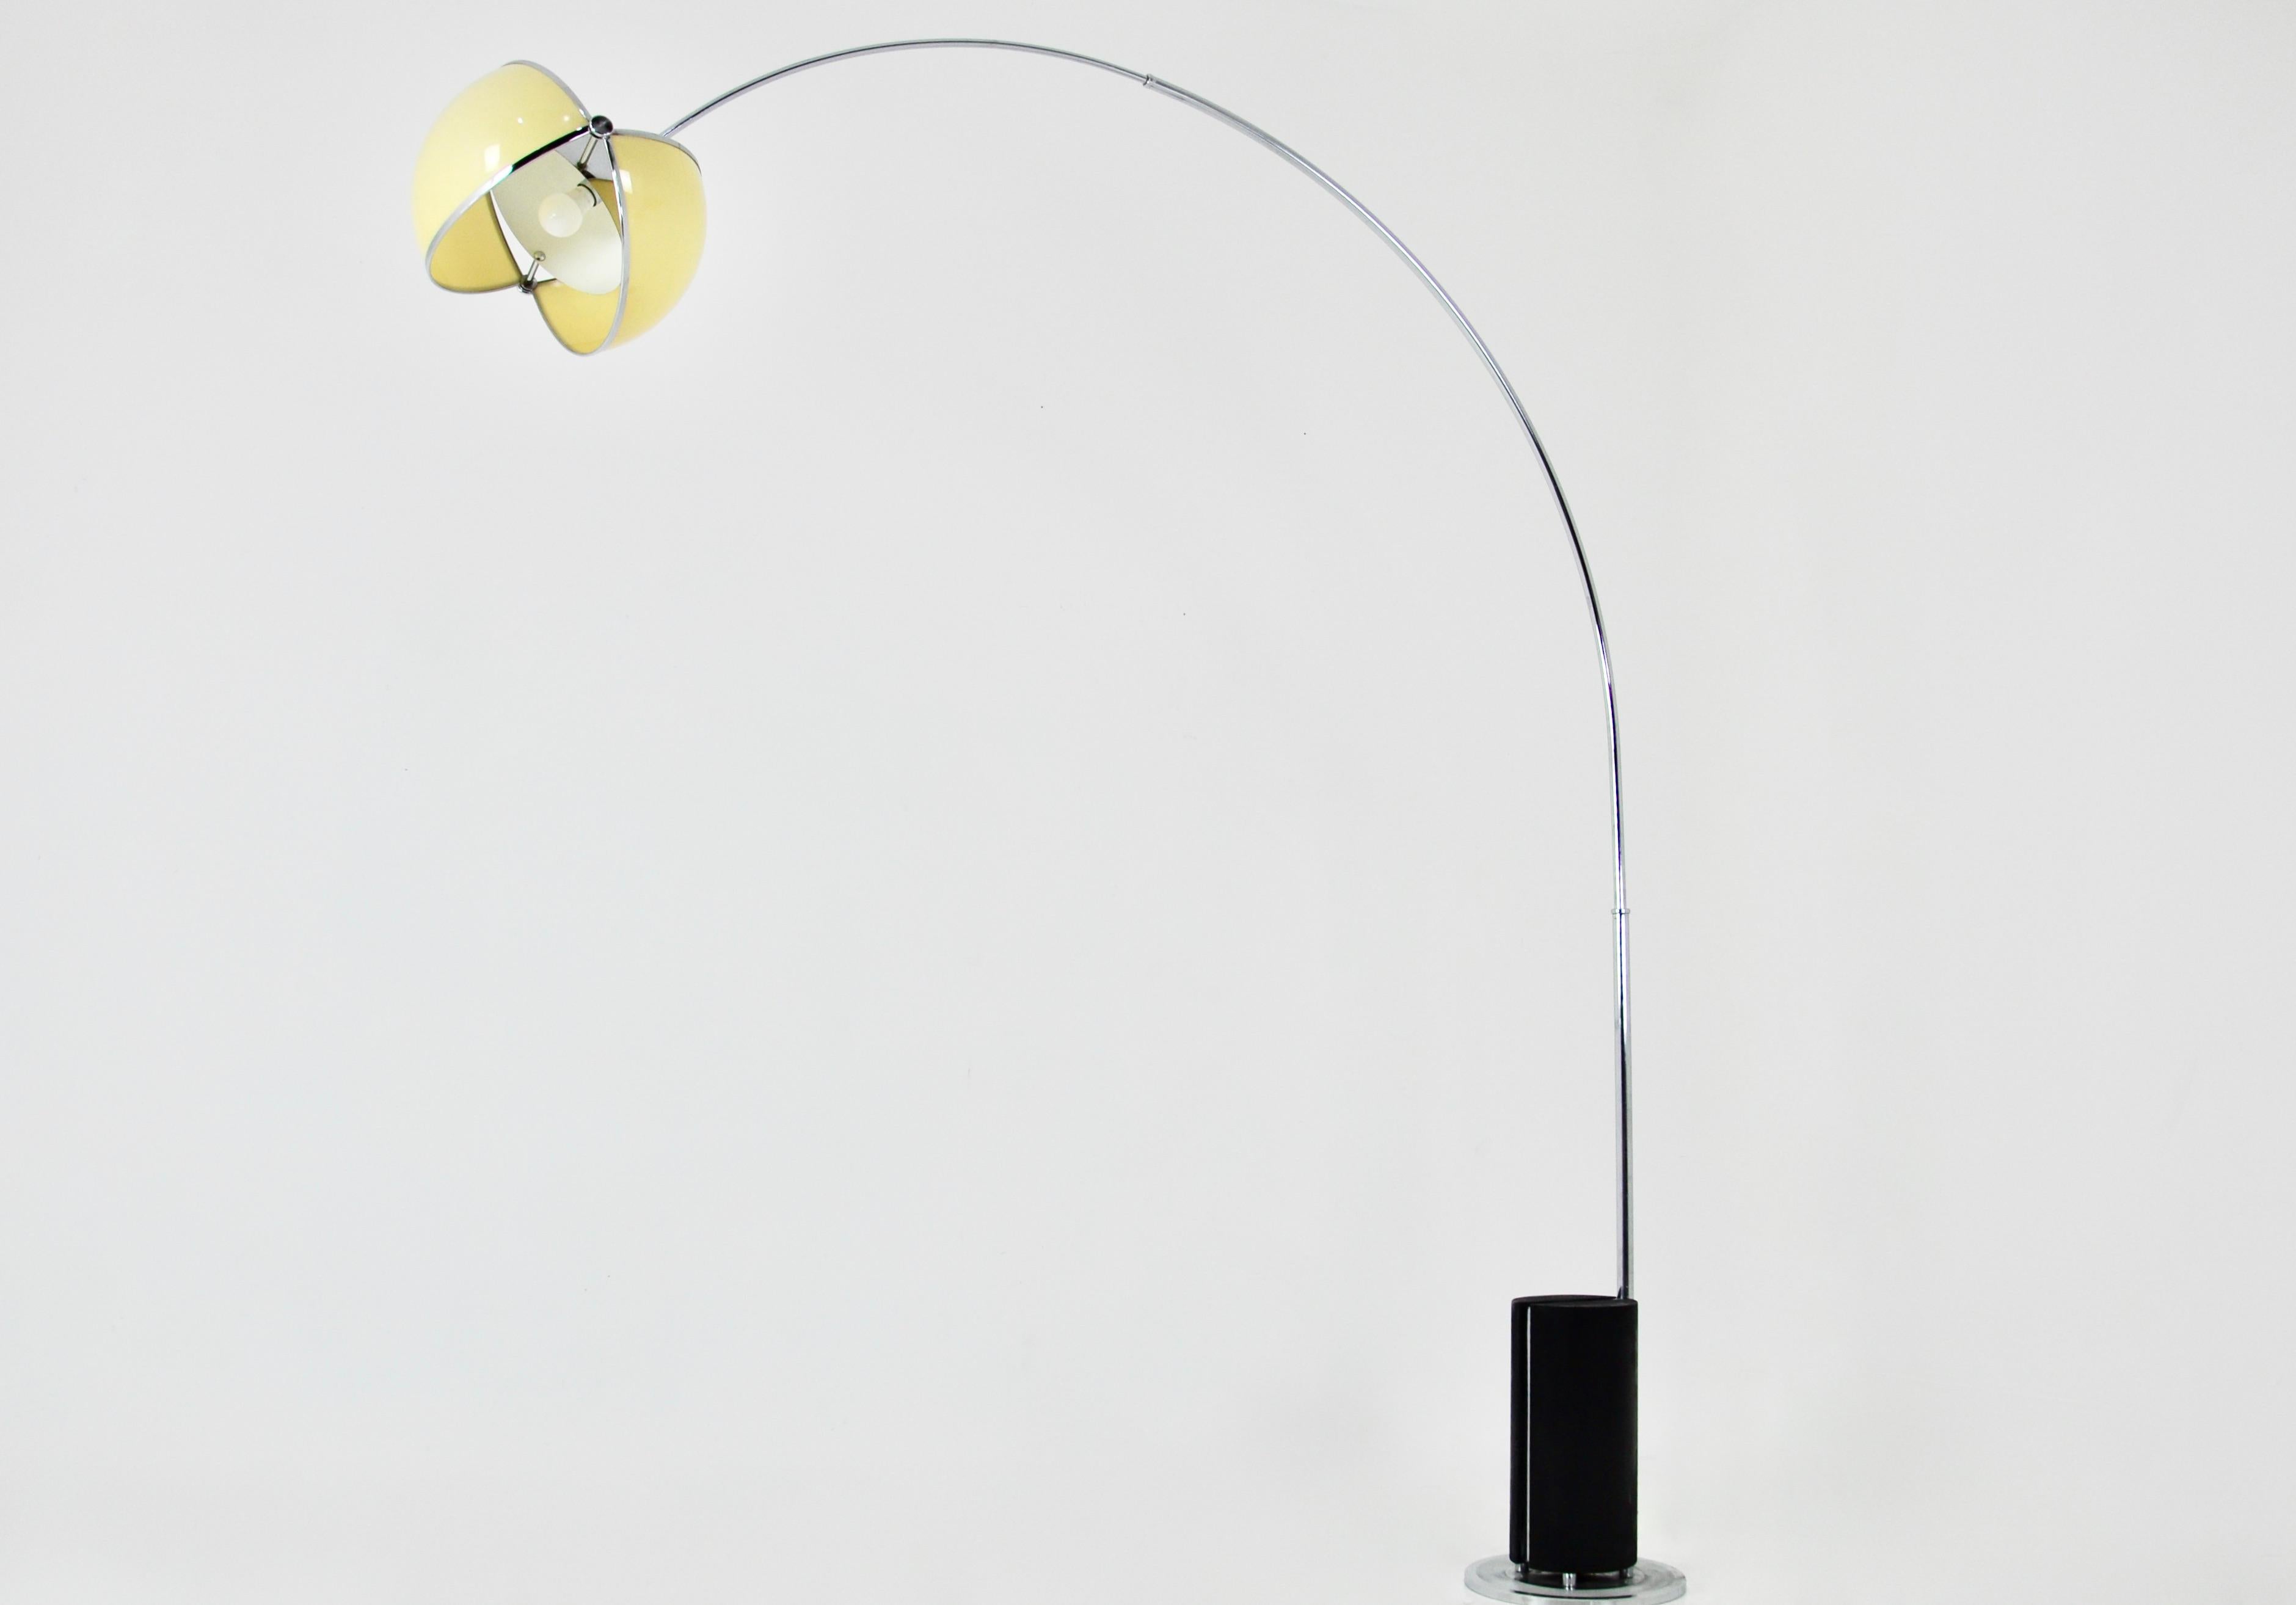 Arco metal floor lamp by superstudio, the plastic globe is shaped like a pac man. Wear due to time and age of the lamp.